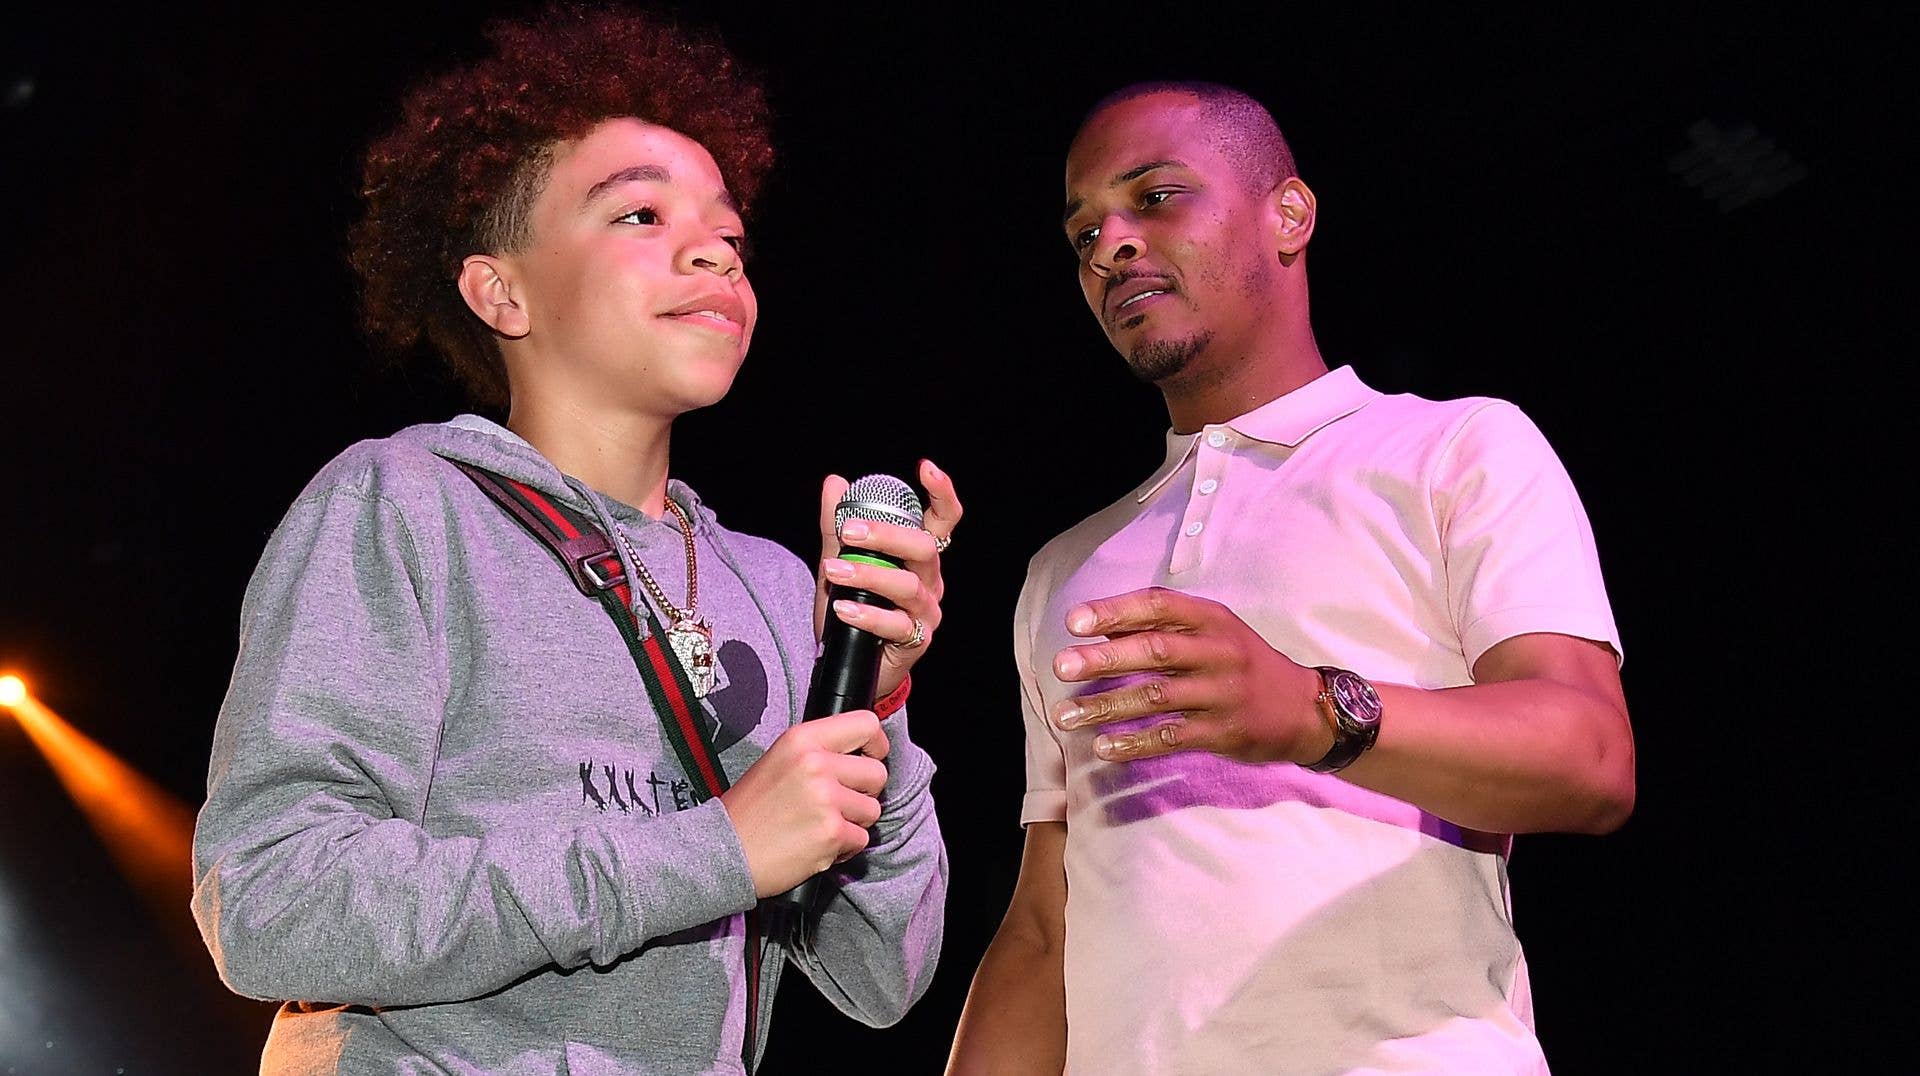 TI with his son King